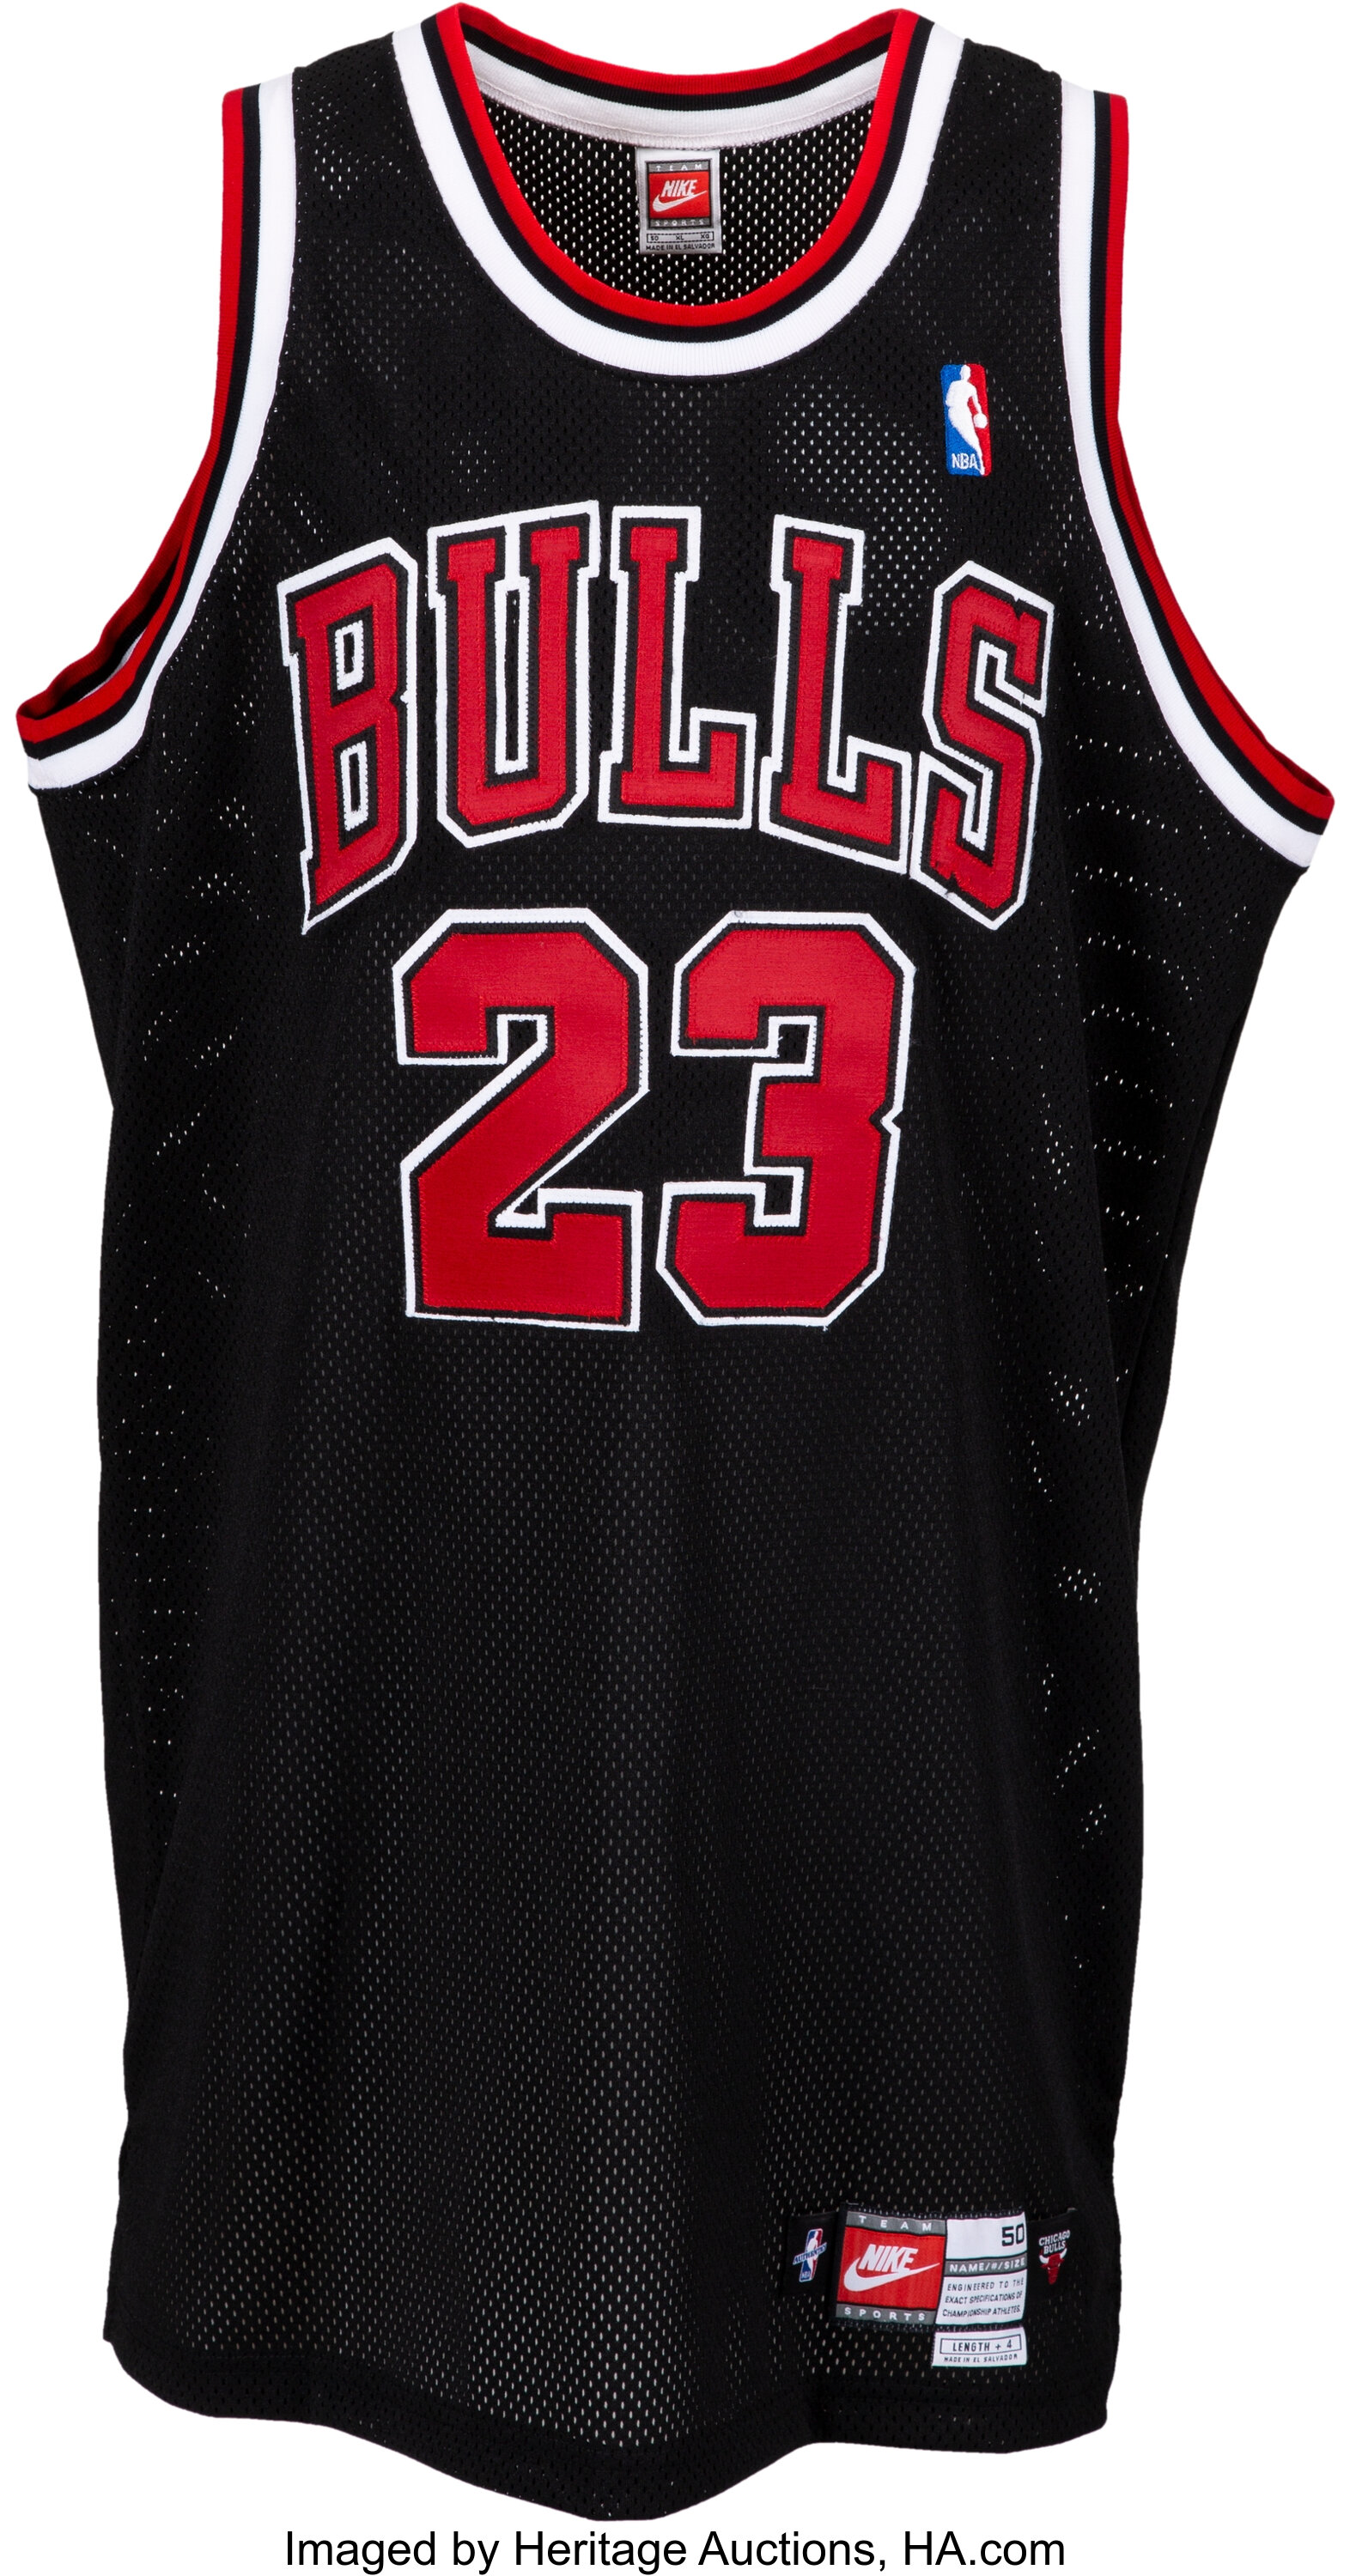 This Fall, You Can Bid On Michael Jordan's Jersey from Space Jam